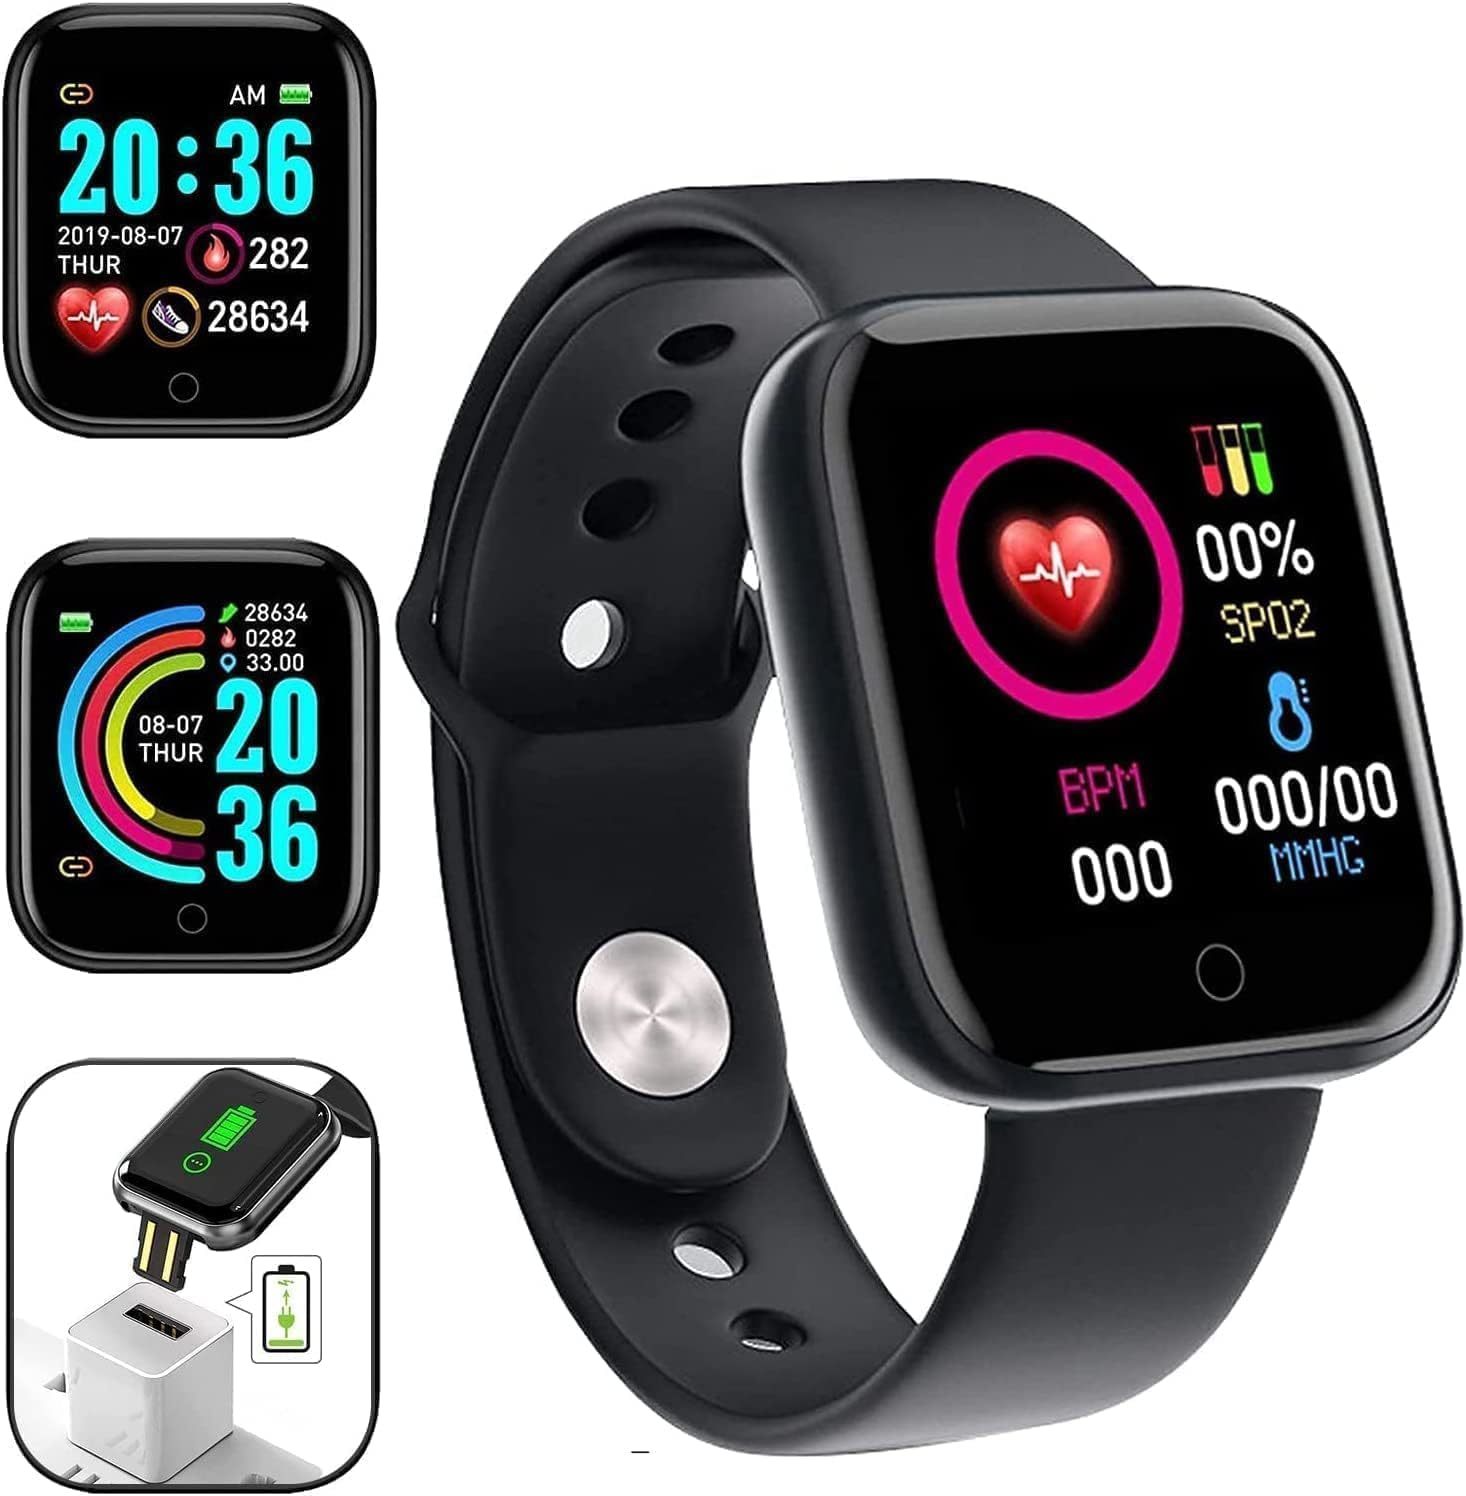 Smart Watch for Men Women Compatible with iPhone Samsung Android Phone 1.44" KL - $25.99